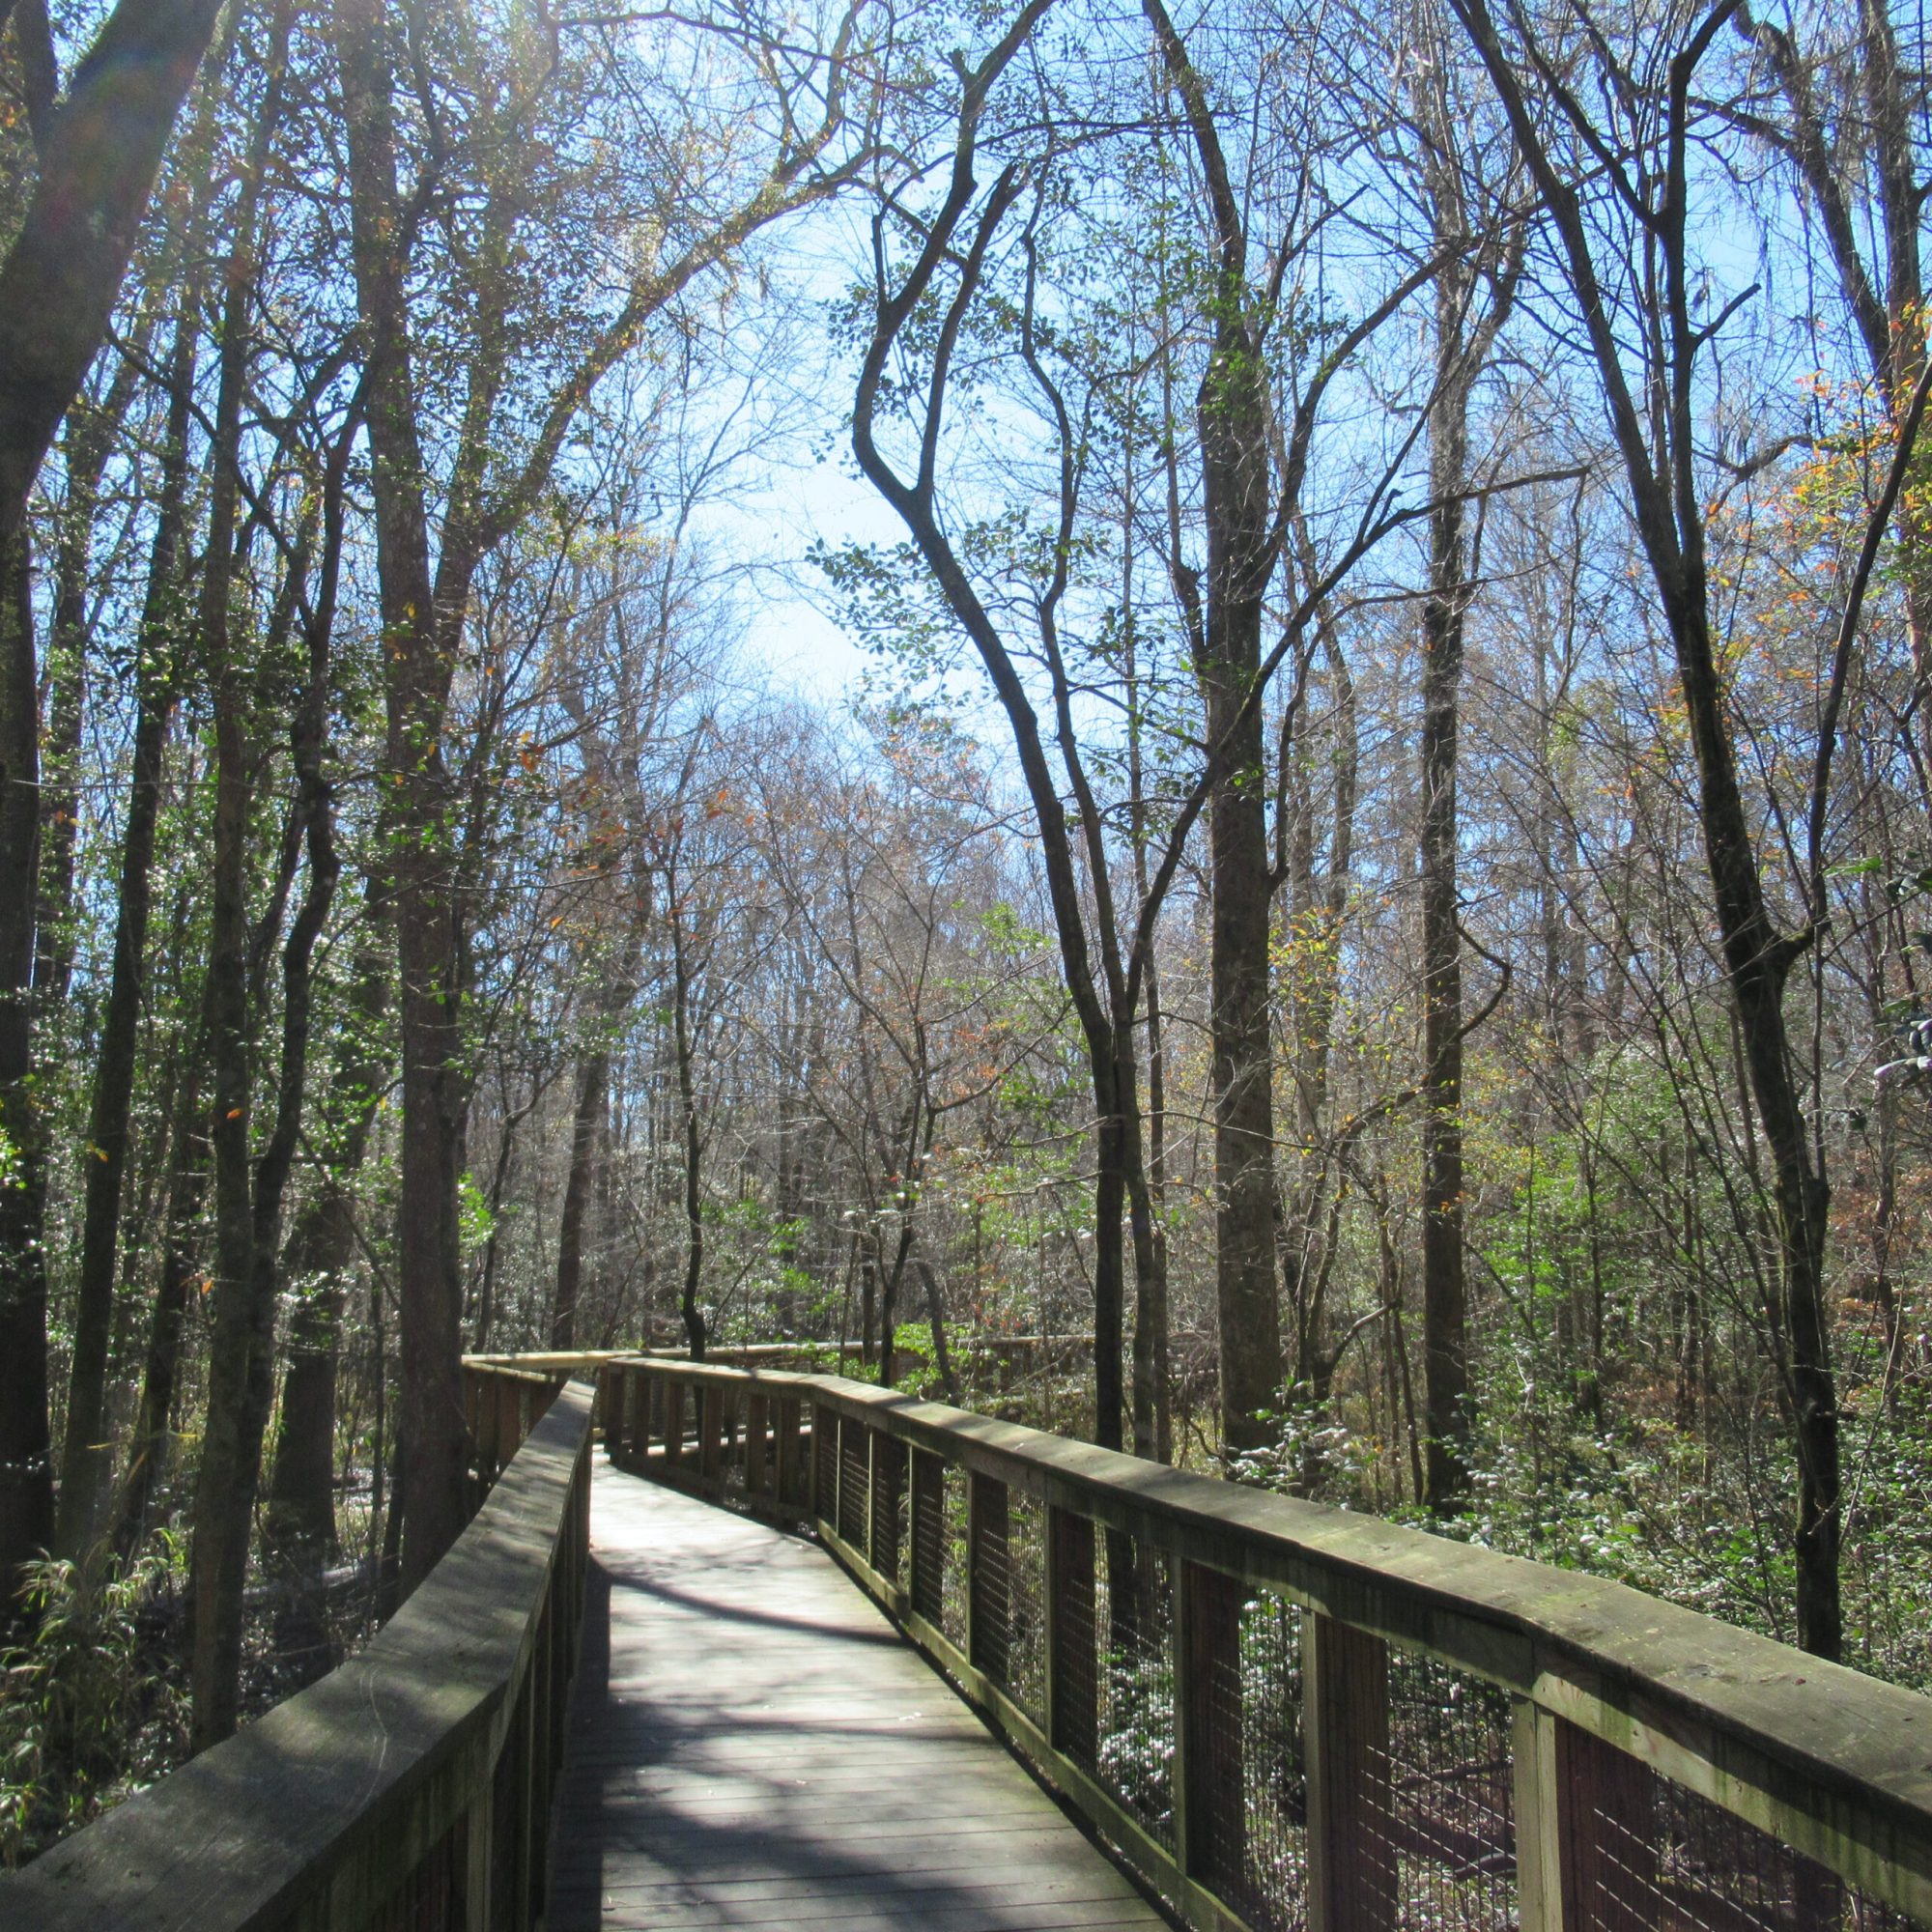 13 Treasures To Explore In Congaree National Park | TravelAwaits